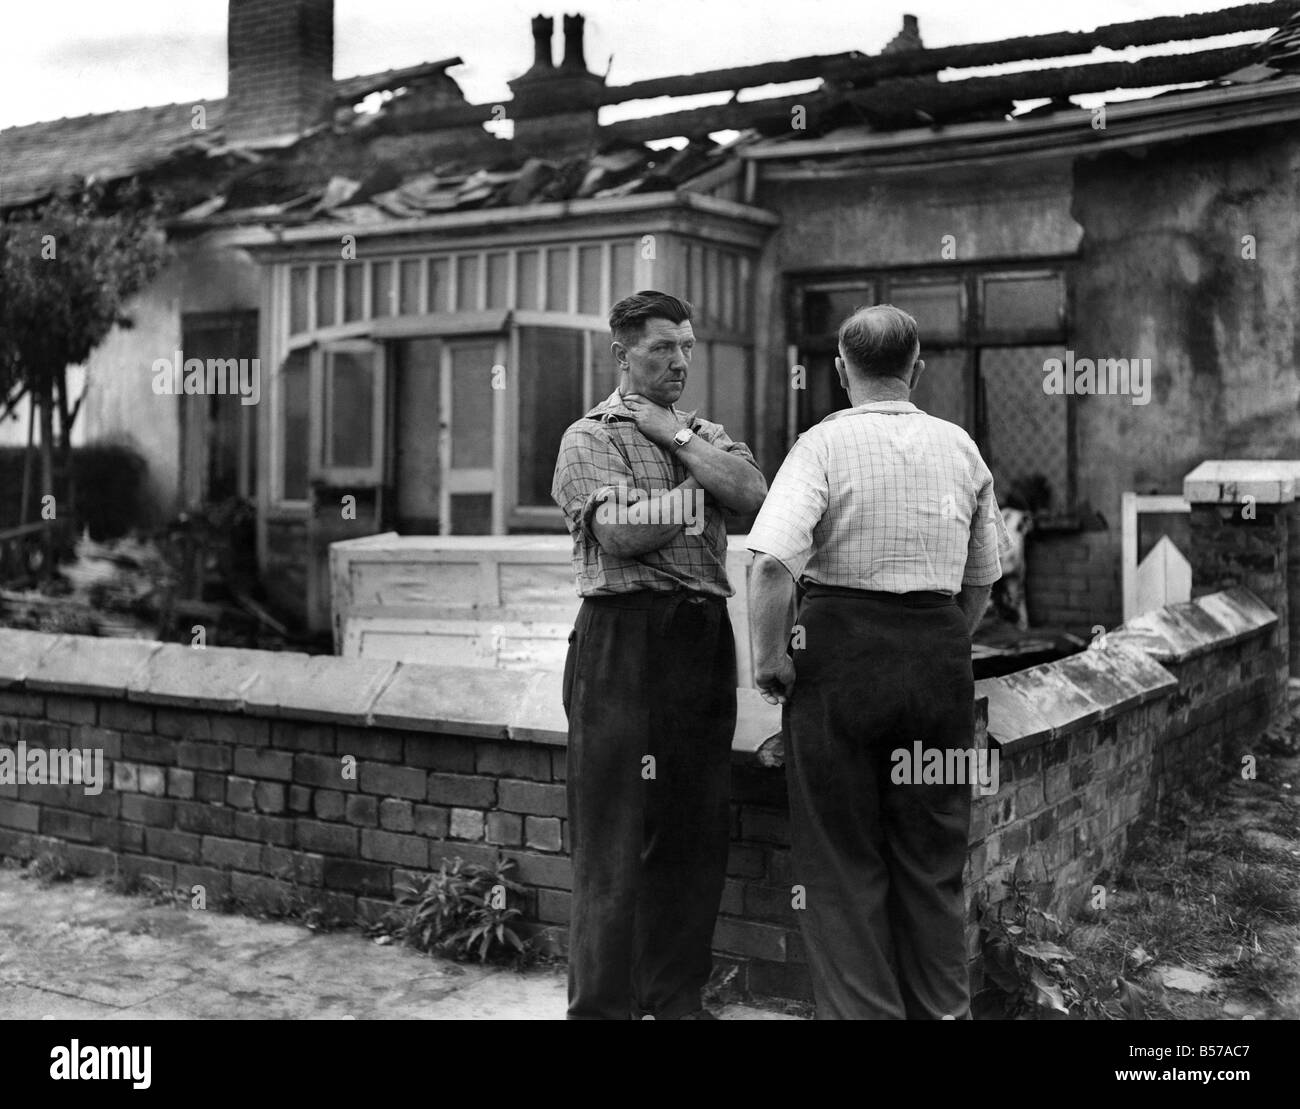 Fireman Jack Skeats, 48, of the Bury Fire Brigade chats to a friend in front of his burnt out bungalow in Hillcrest Ave., Heywood, Lancs. The house caught fire when he was burning off paint with a blow lamp. July 1960 P007261 Stock Photo